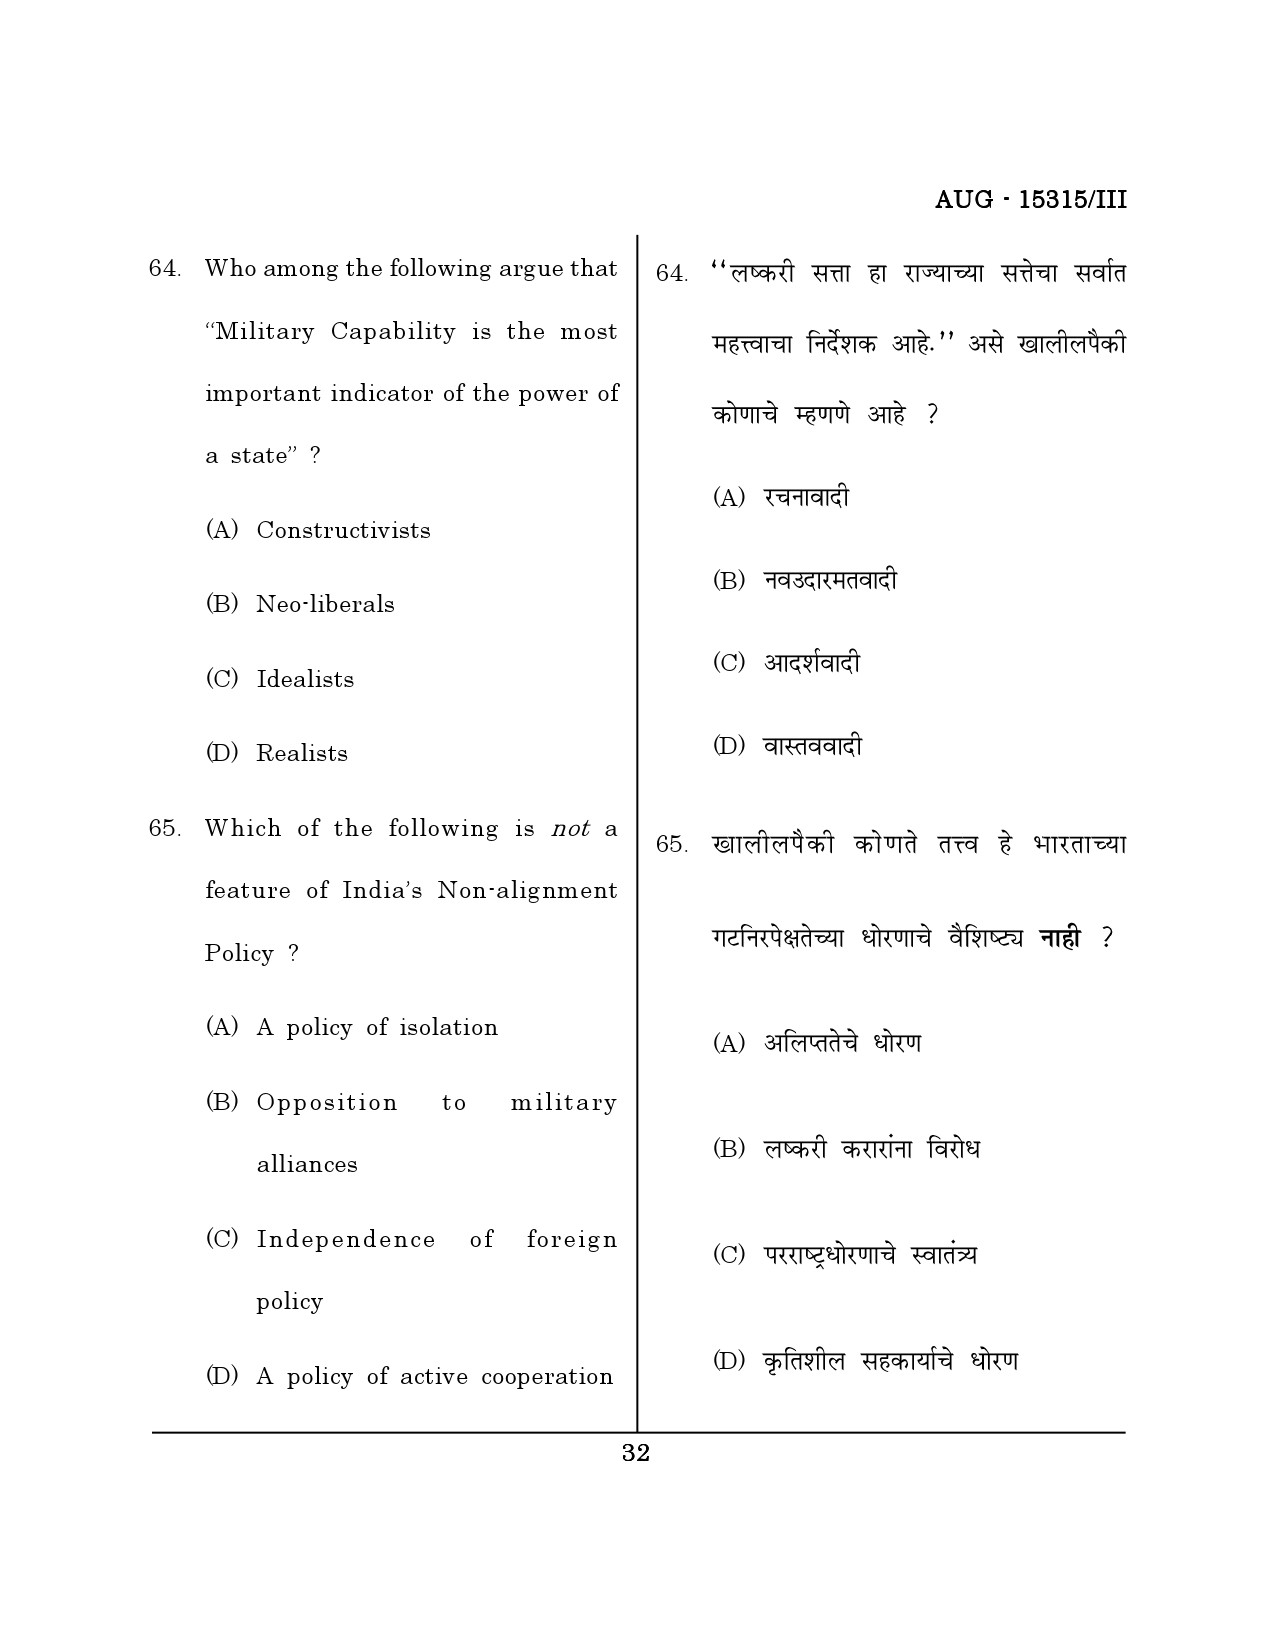 Maharashtra SET Political Science Question Paper III August 2015 31